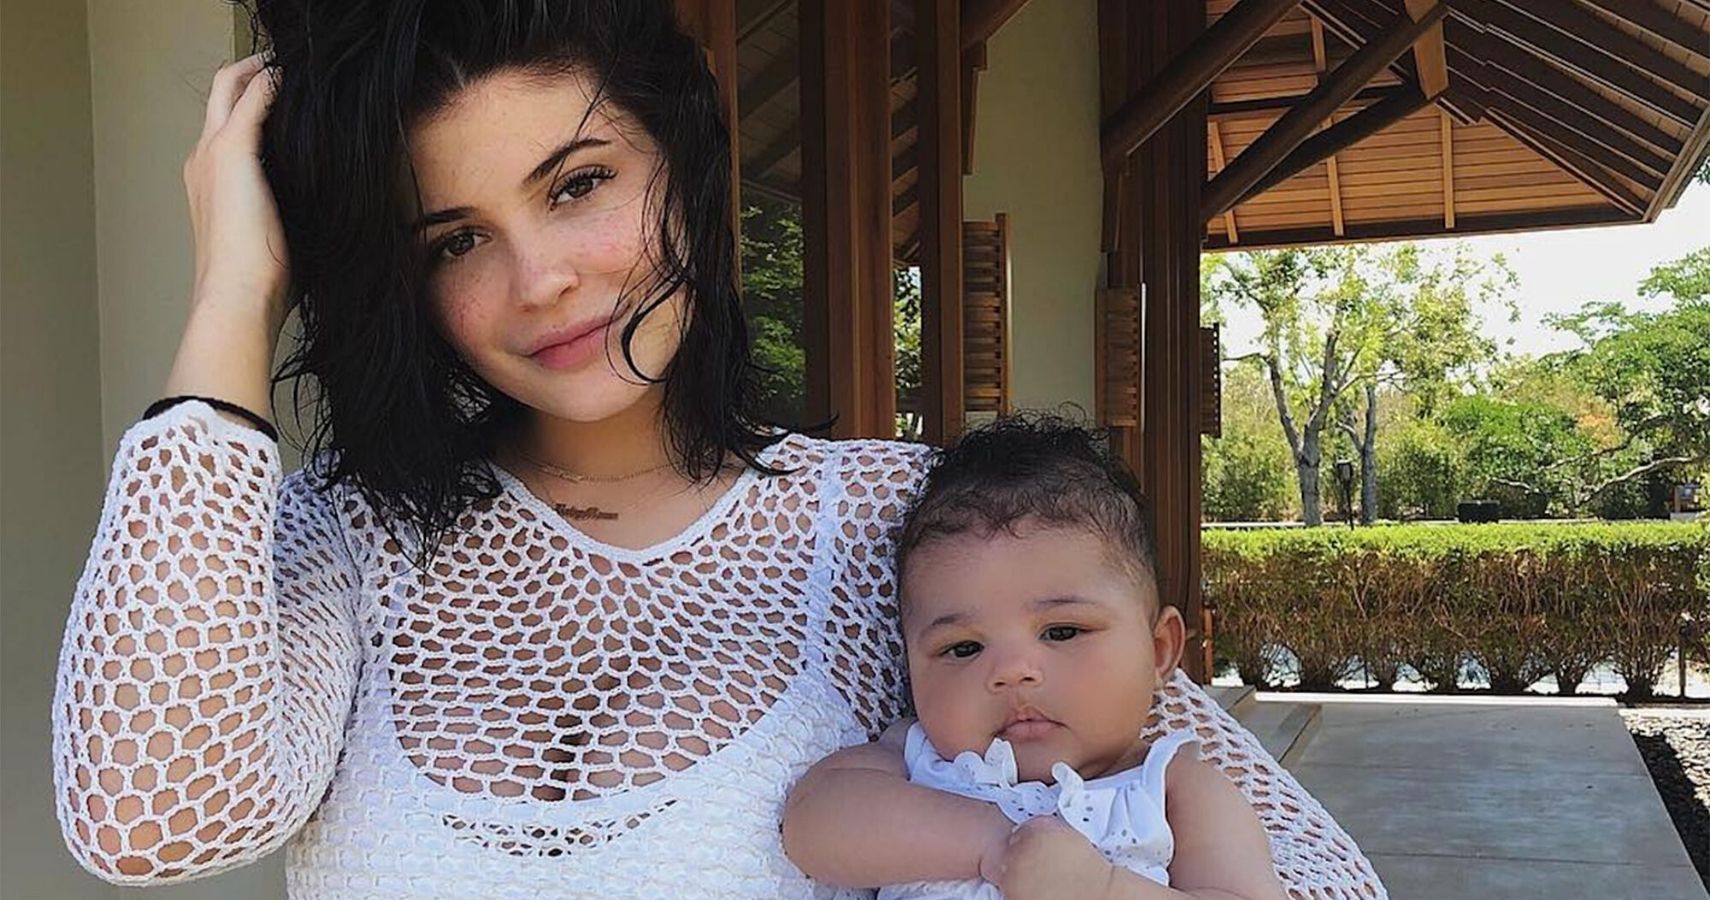 Kylie Jenner Shows Off New Playroom For 2-Year-Old Daughter Stormi